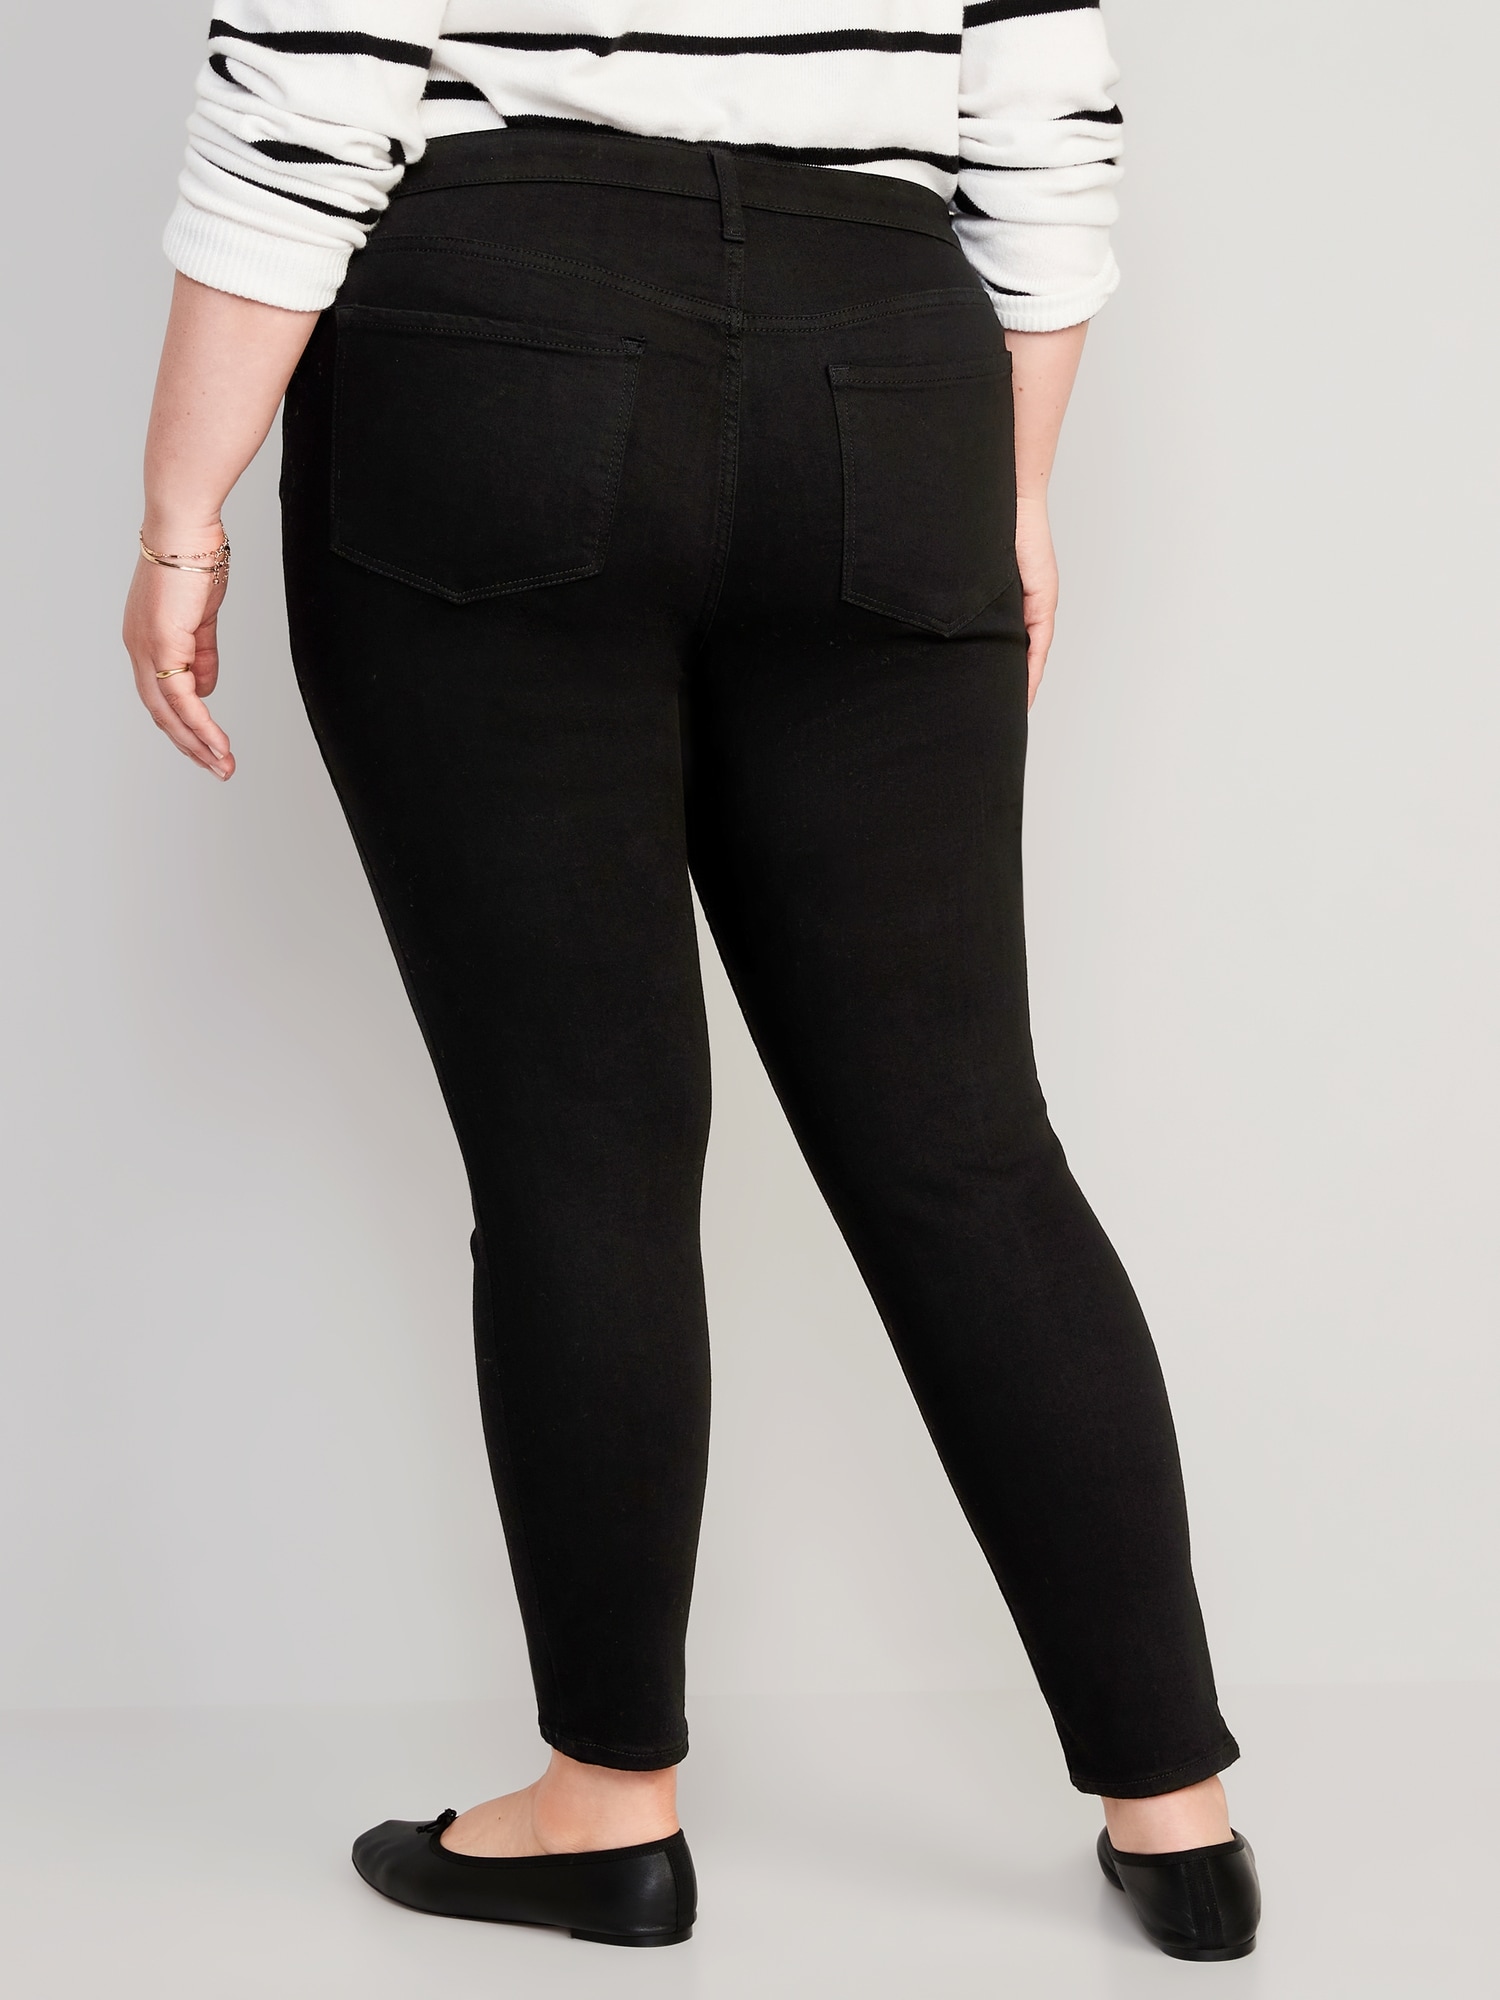 Mid Rise Rockstar Super Skinny Jeans For Women Old Navy